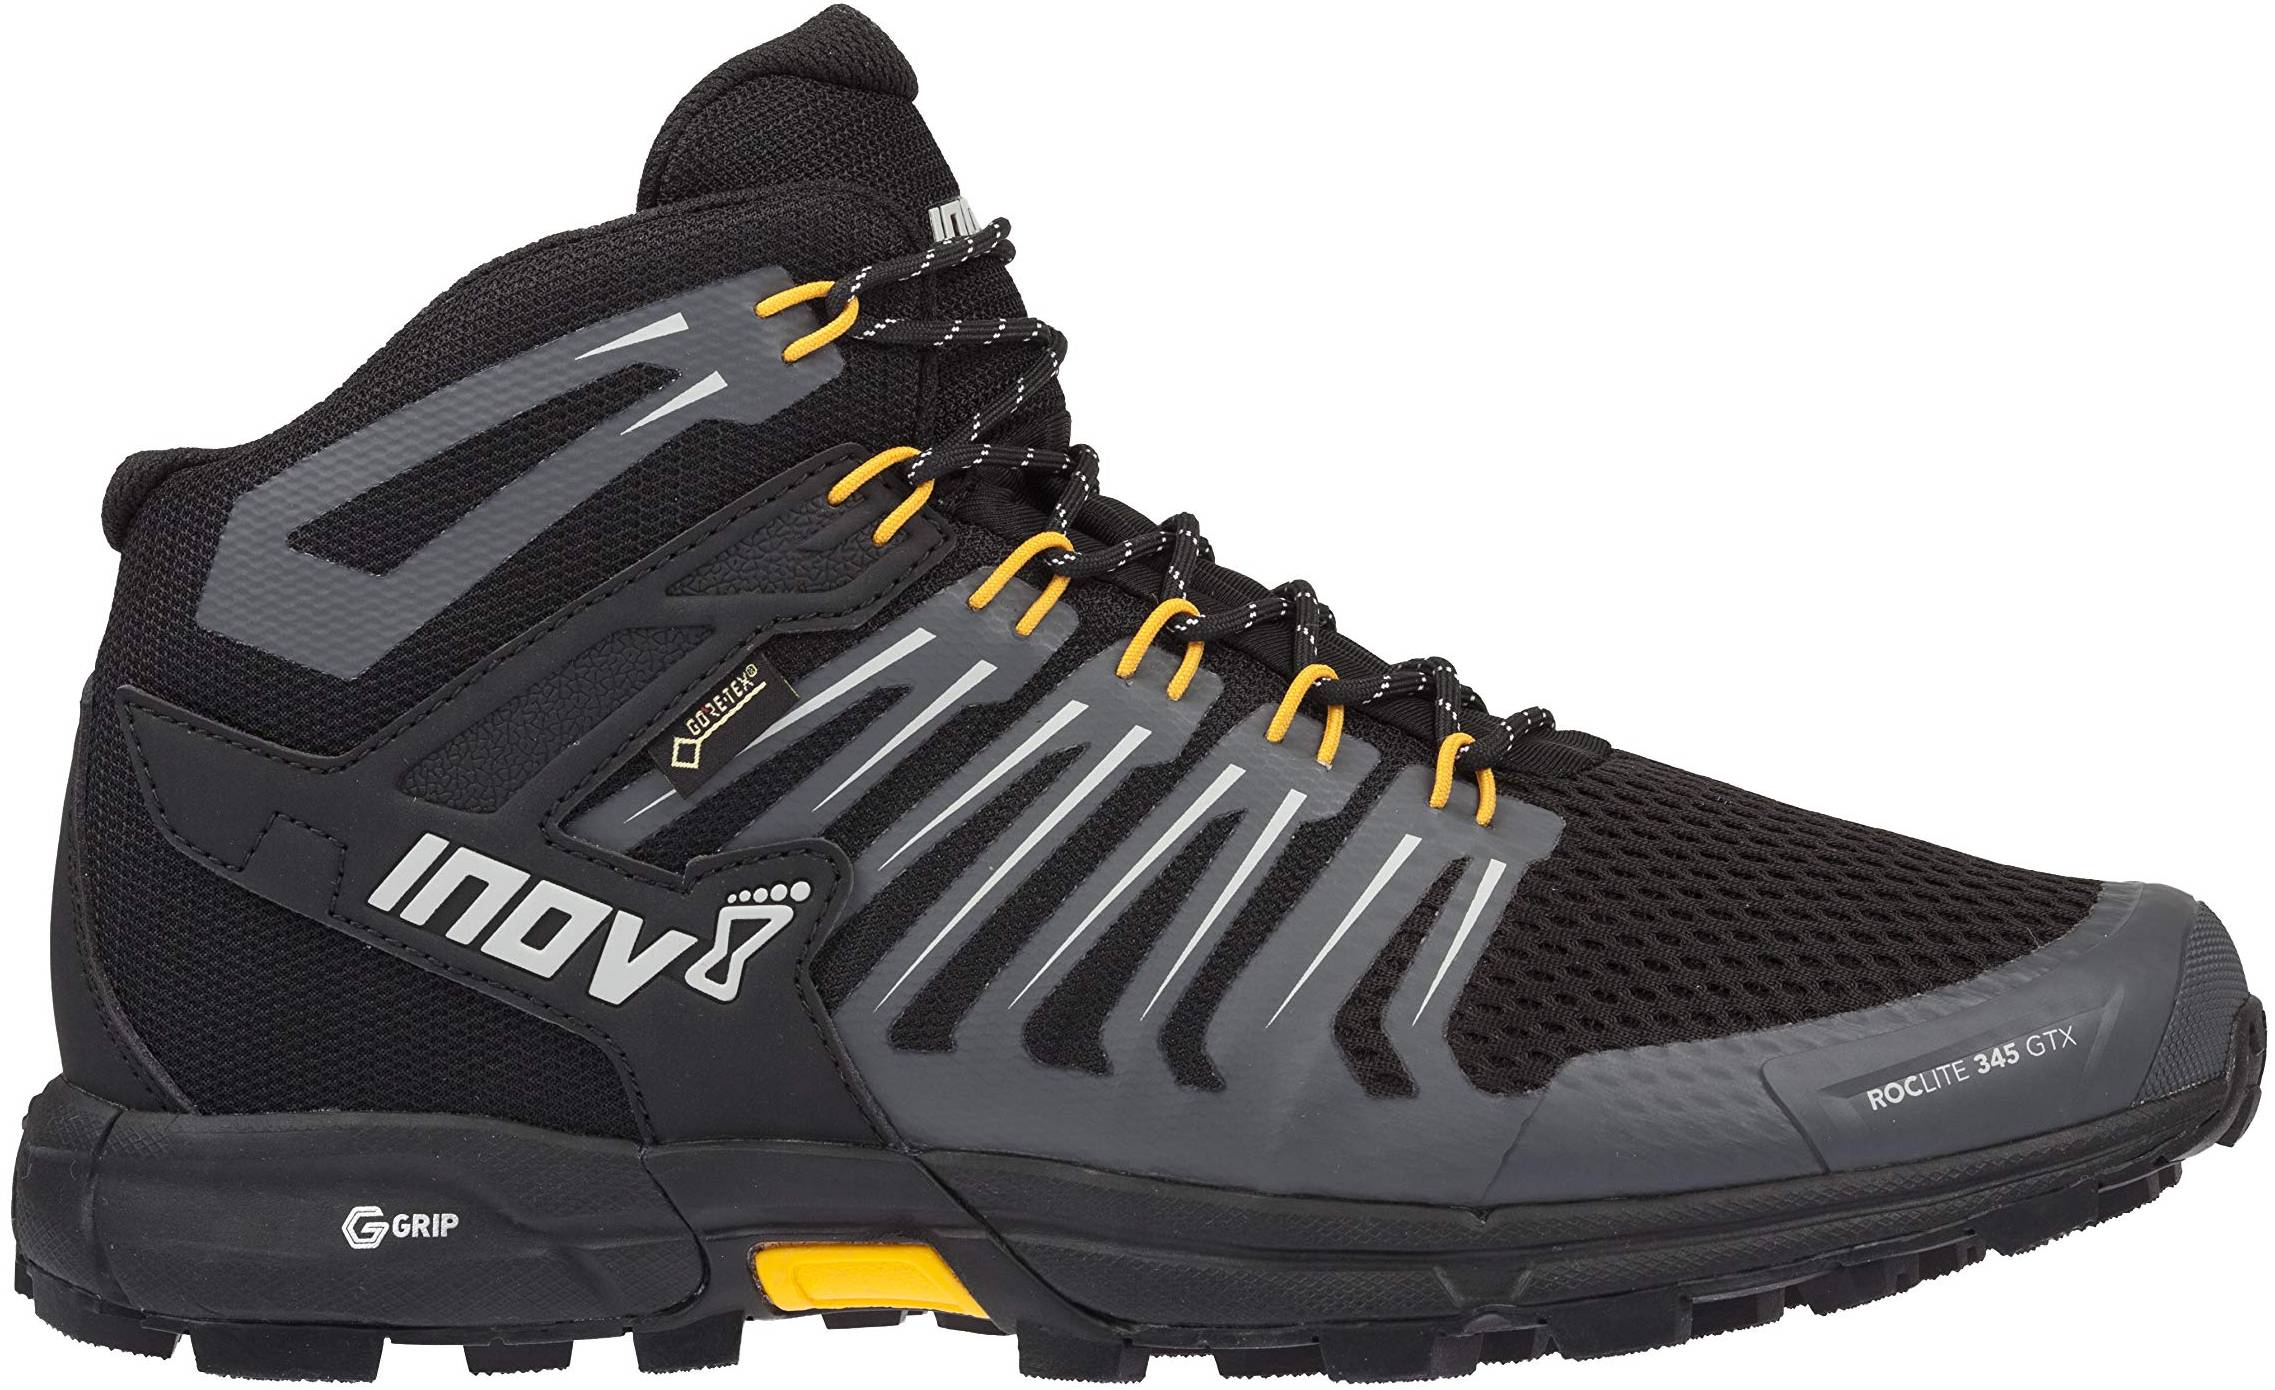 Save 24% on Speed Hiking Shoes (36 